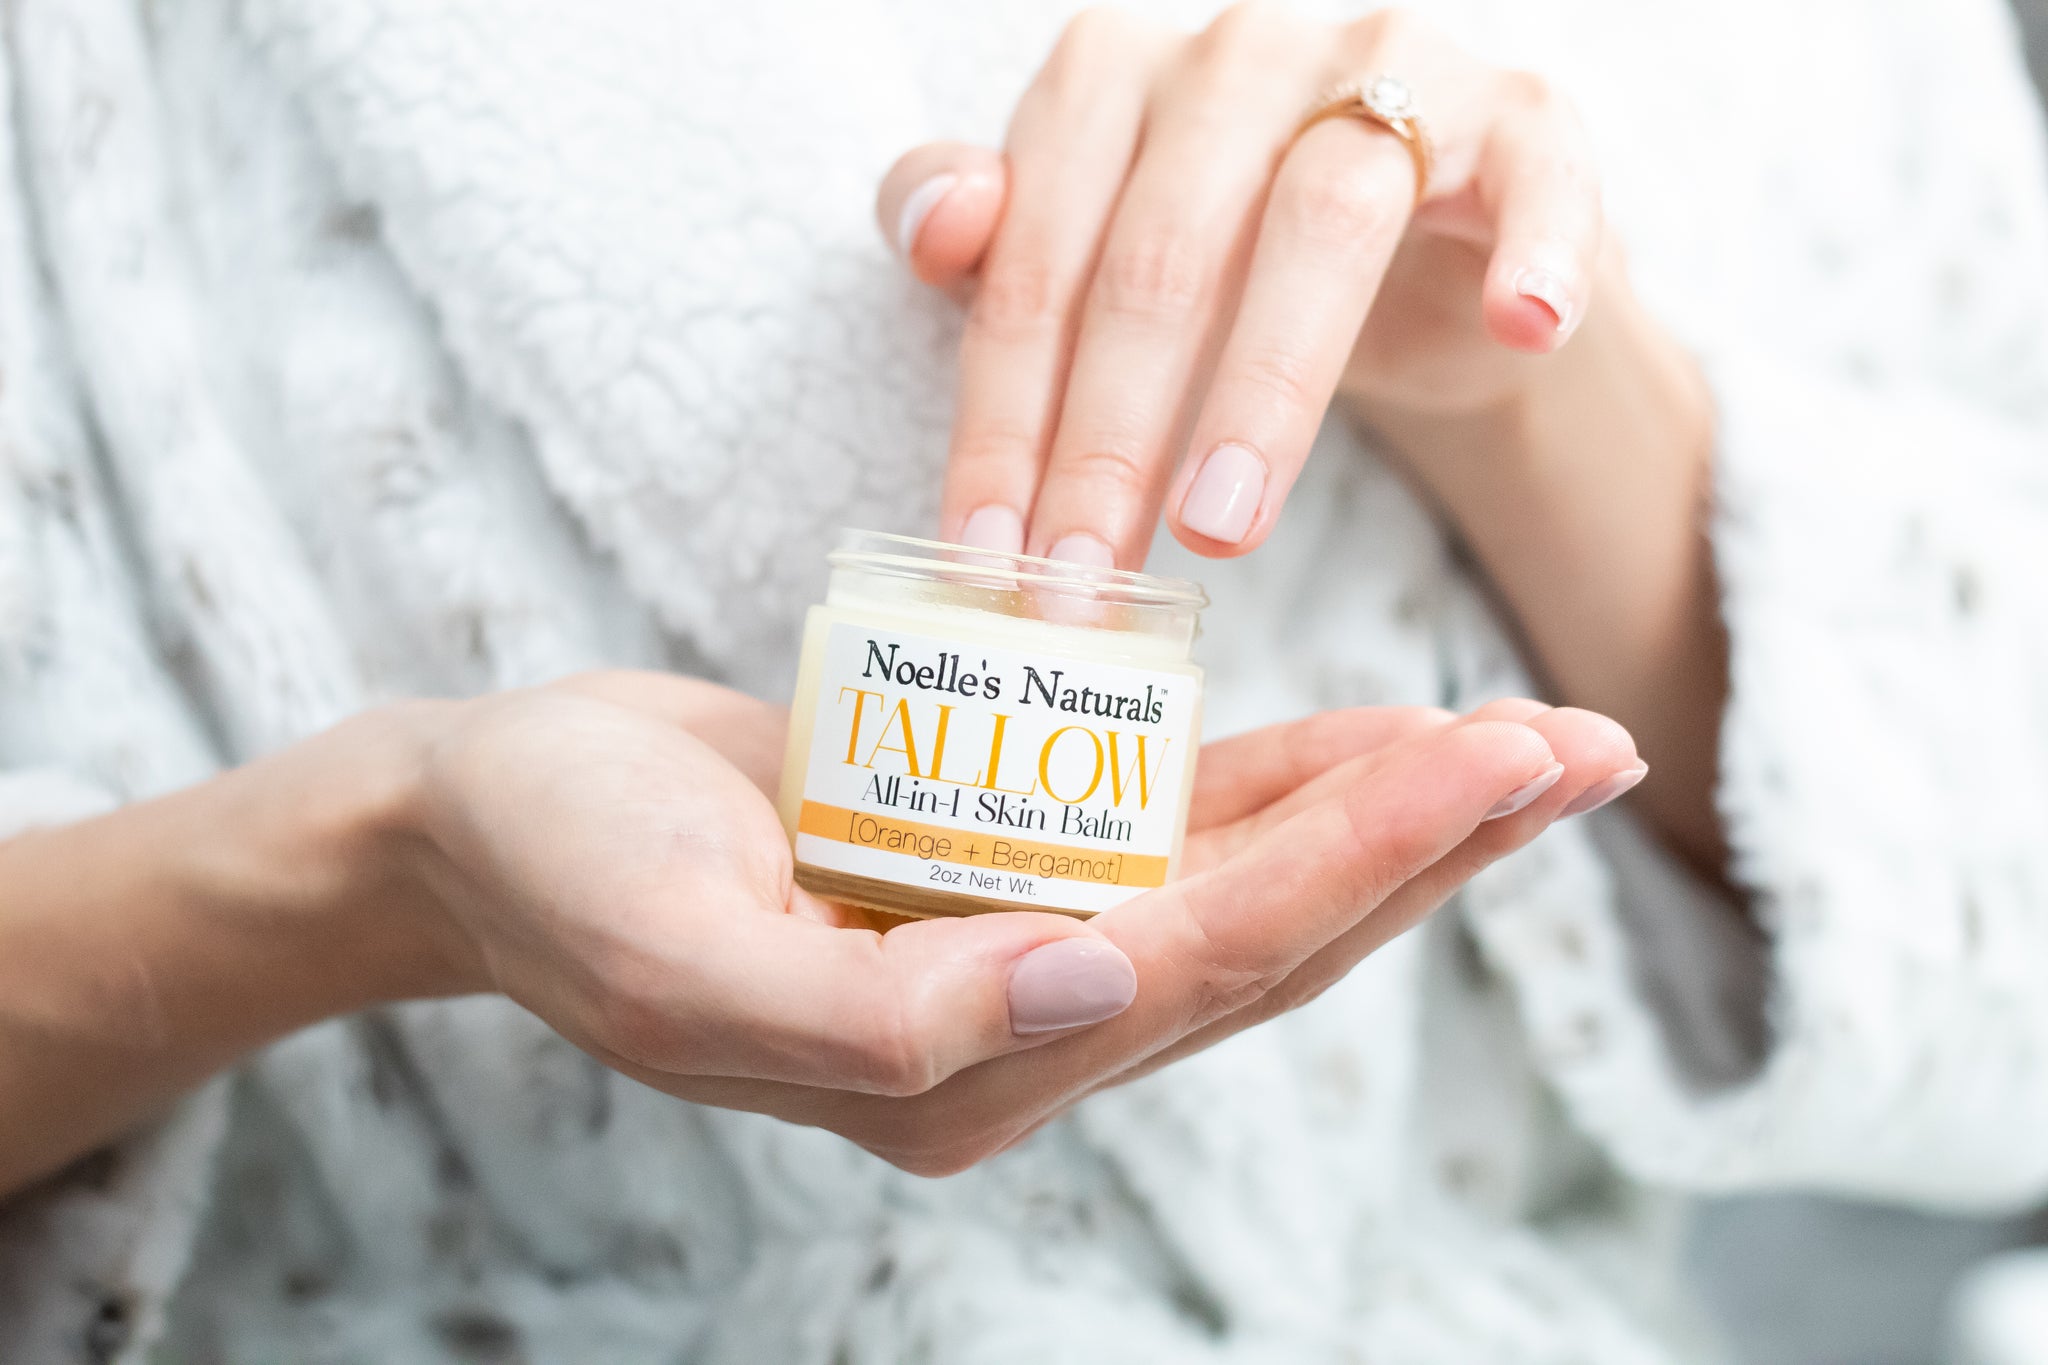 Noelle's Naturals 100% Grassfed Tallow Balm in Orange and Bergamot. Perfect tallow balm for on the go! Will leave your skin nourished and moisturized with all natural, non-toxic ingredients!